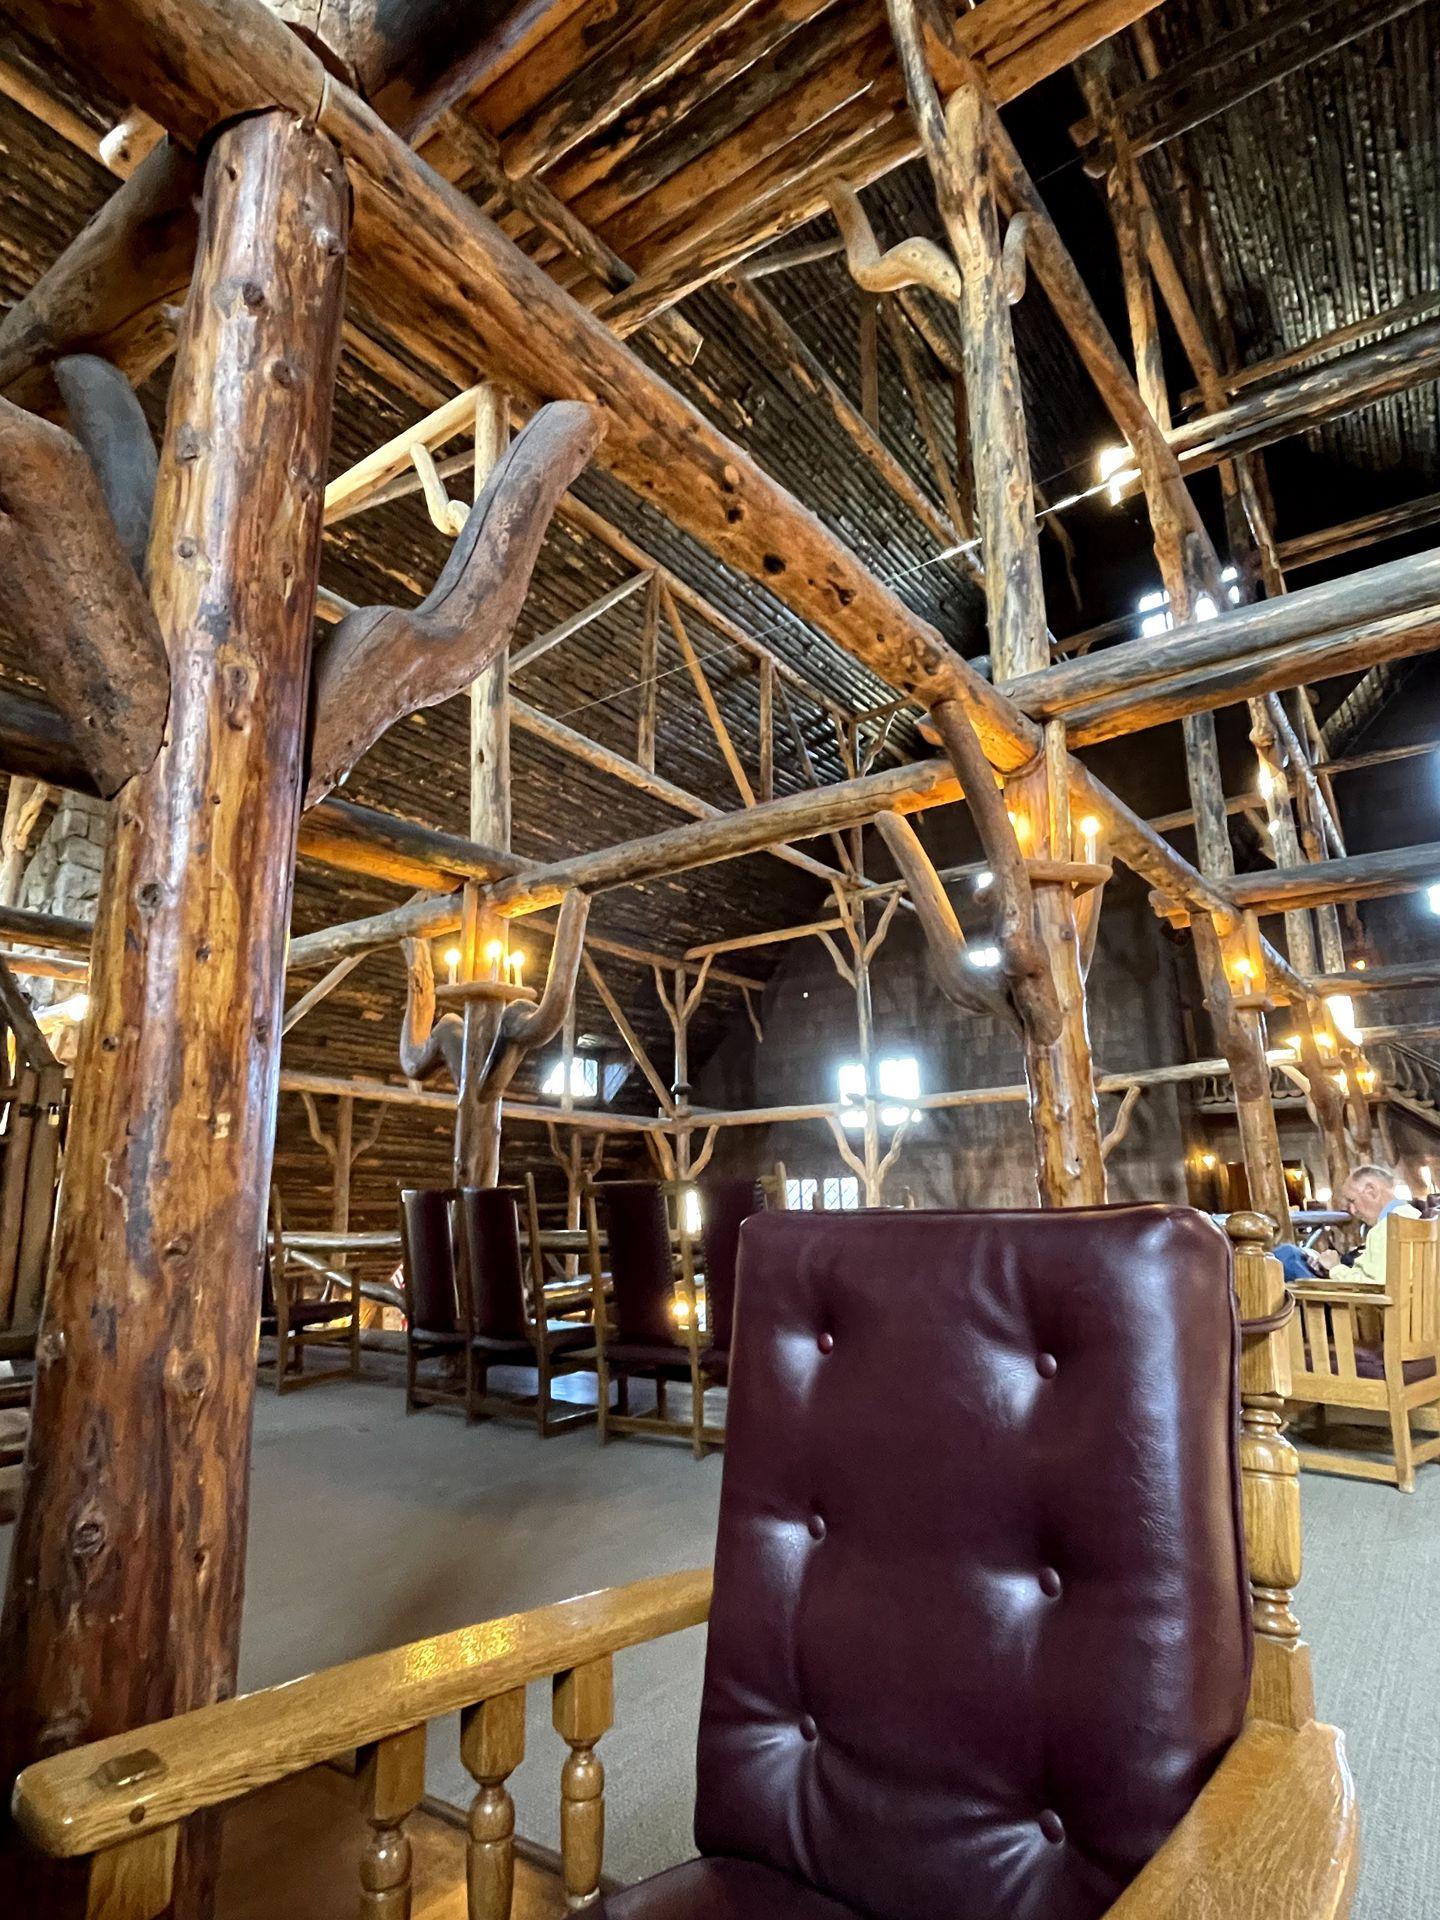 A chair and the ceiling made up of logs in the lobby of the Old Faithful Inn